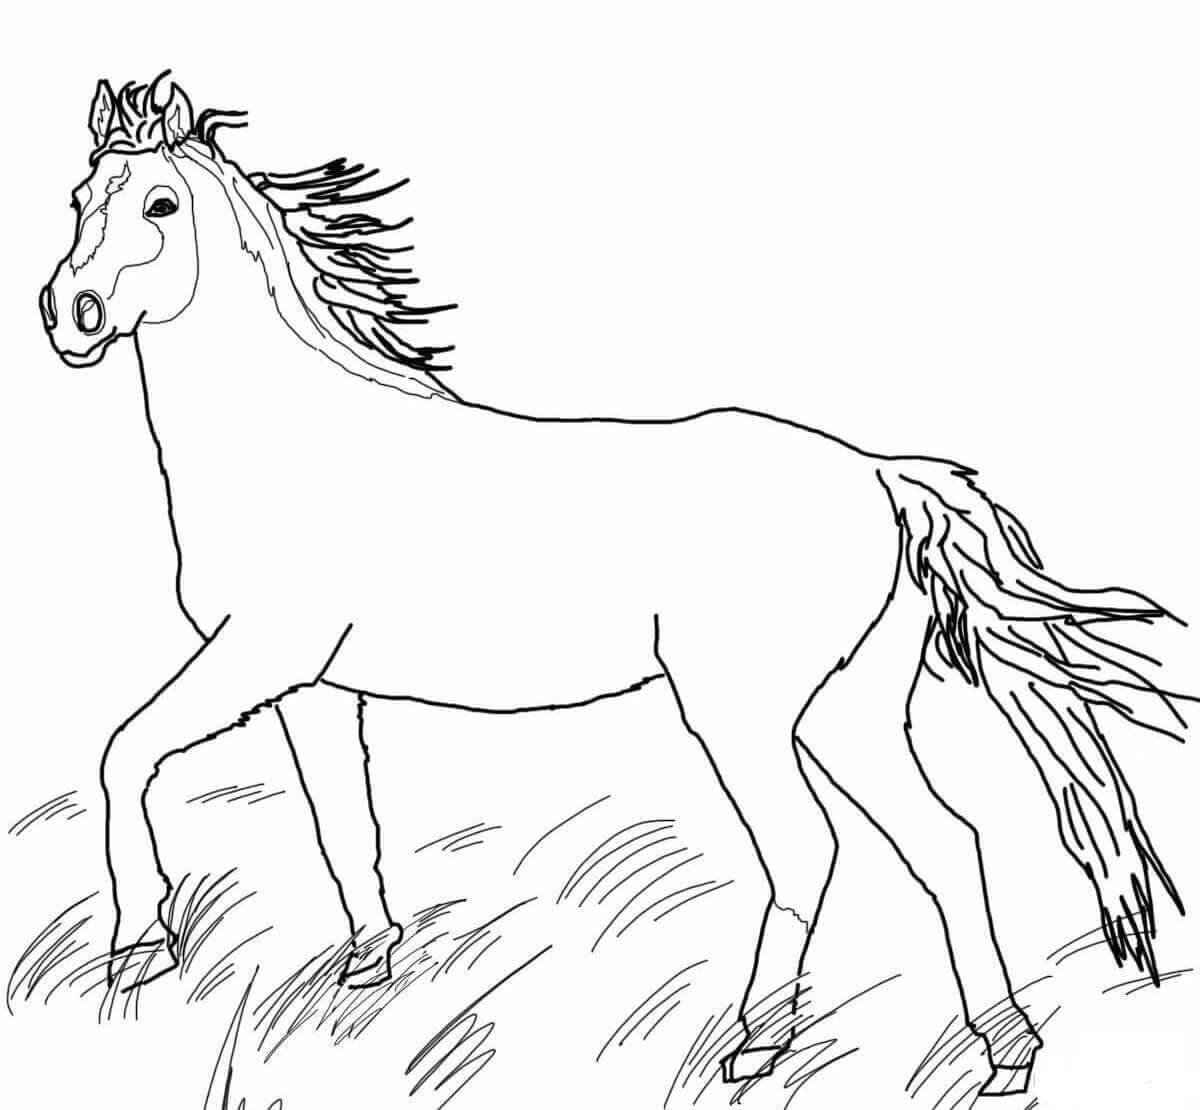 Galloping horse for coloring